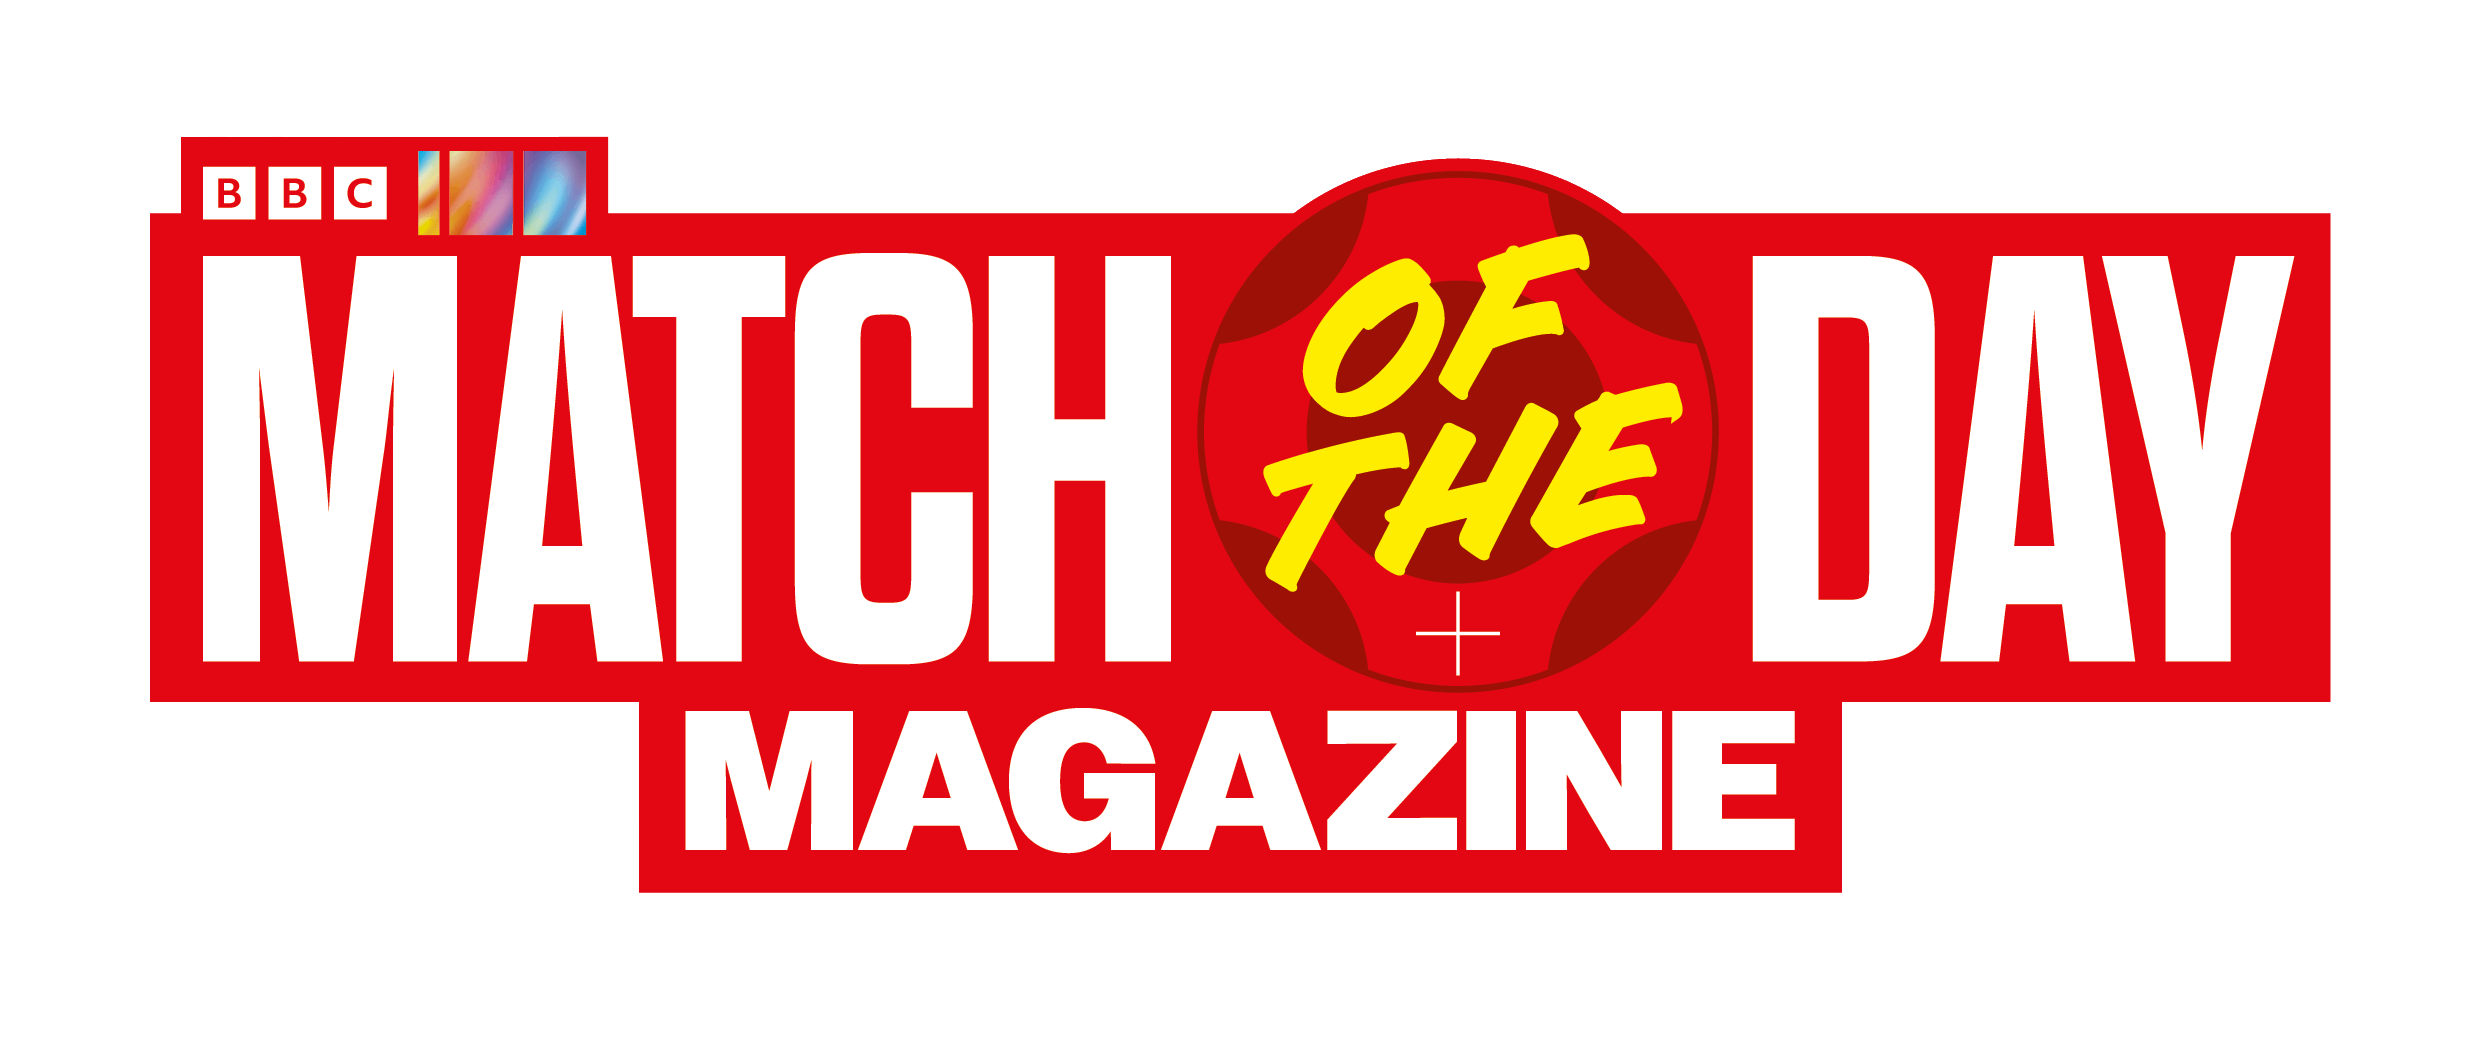 Match of the Day Magazine Subscription Buysubscriptions